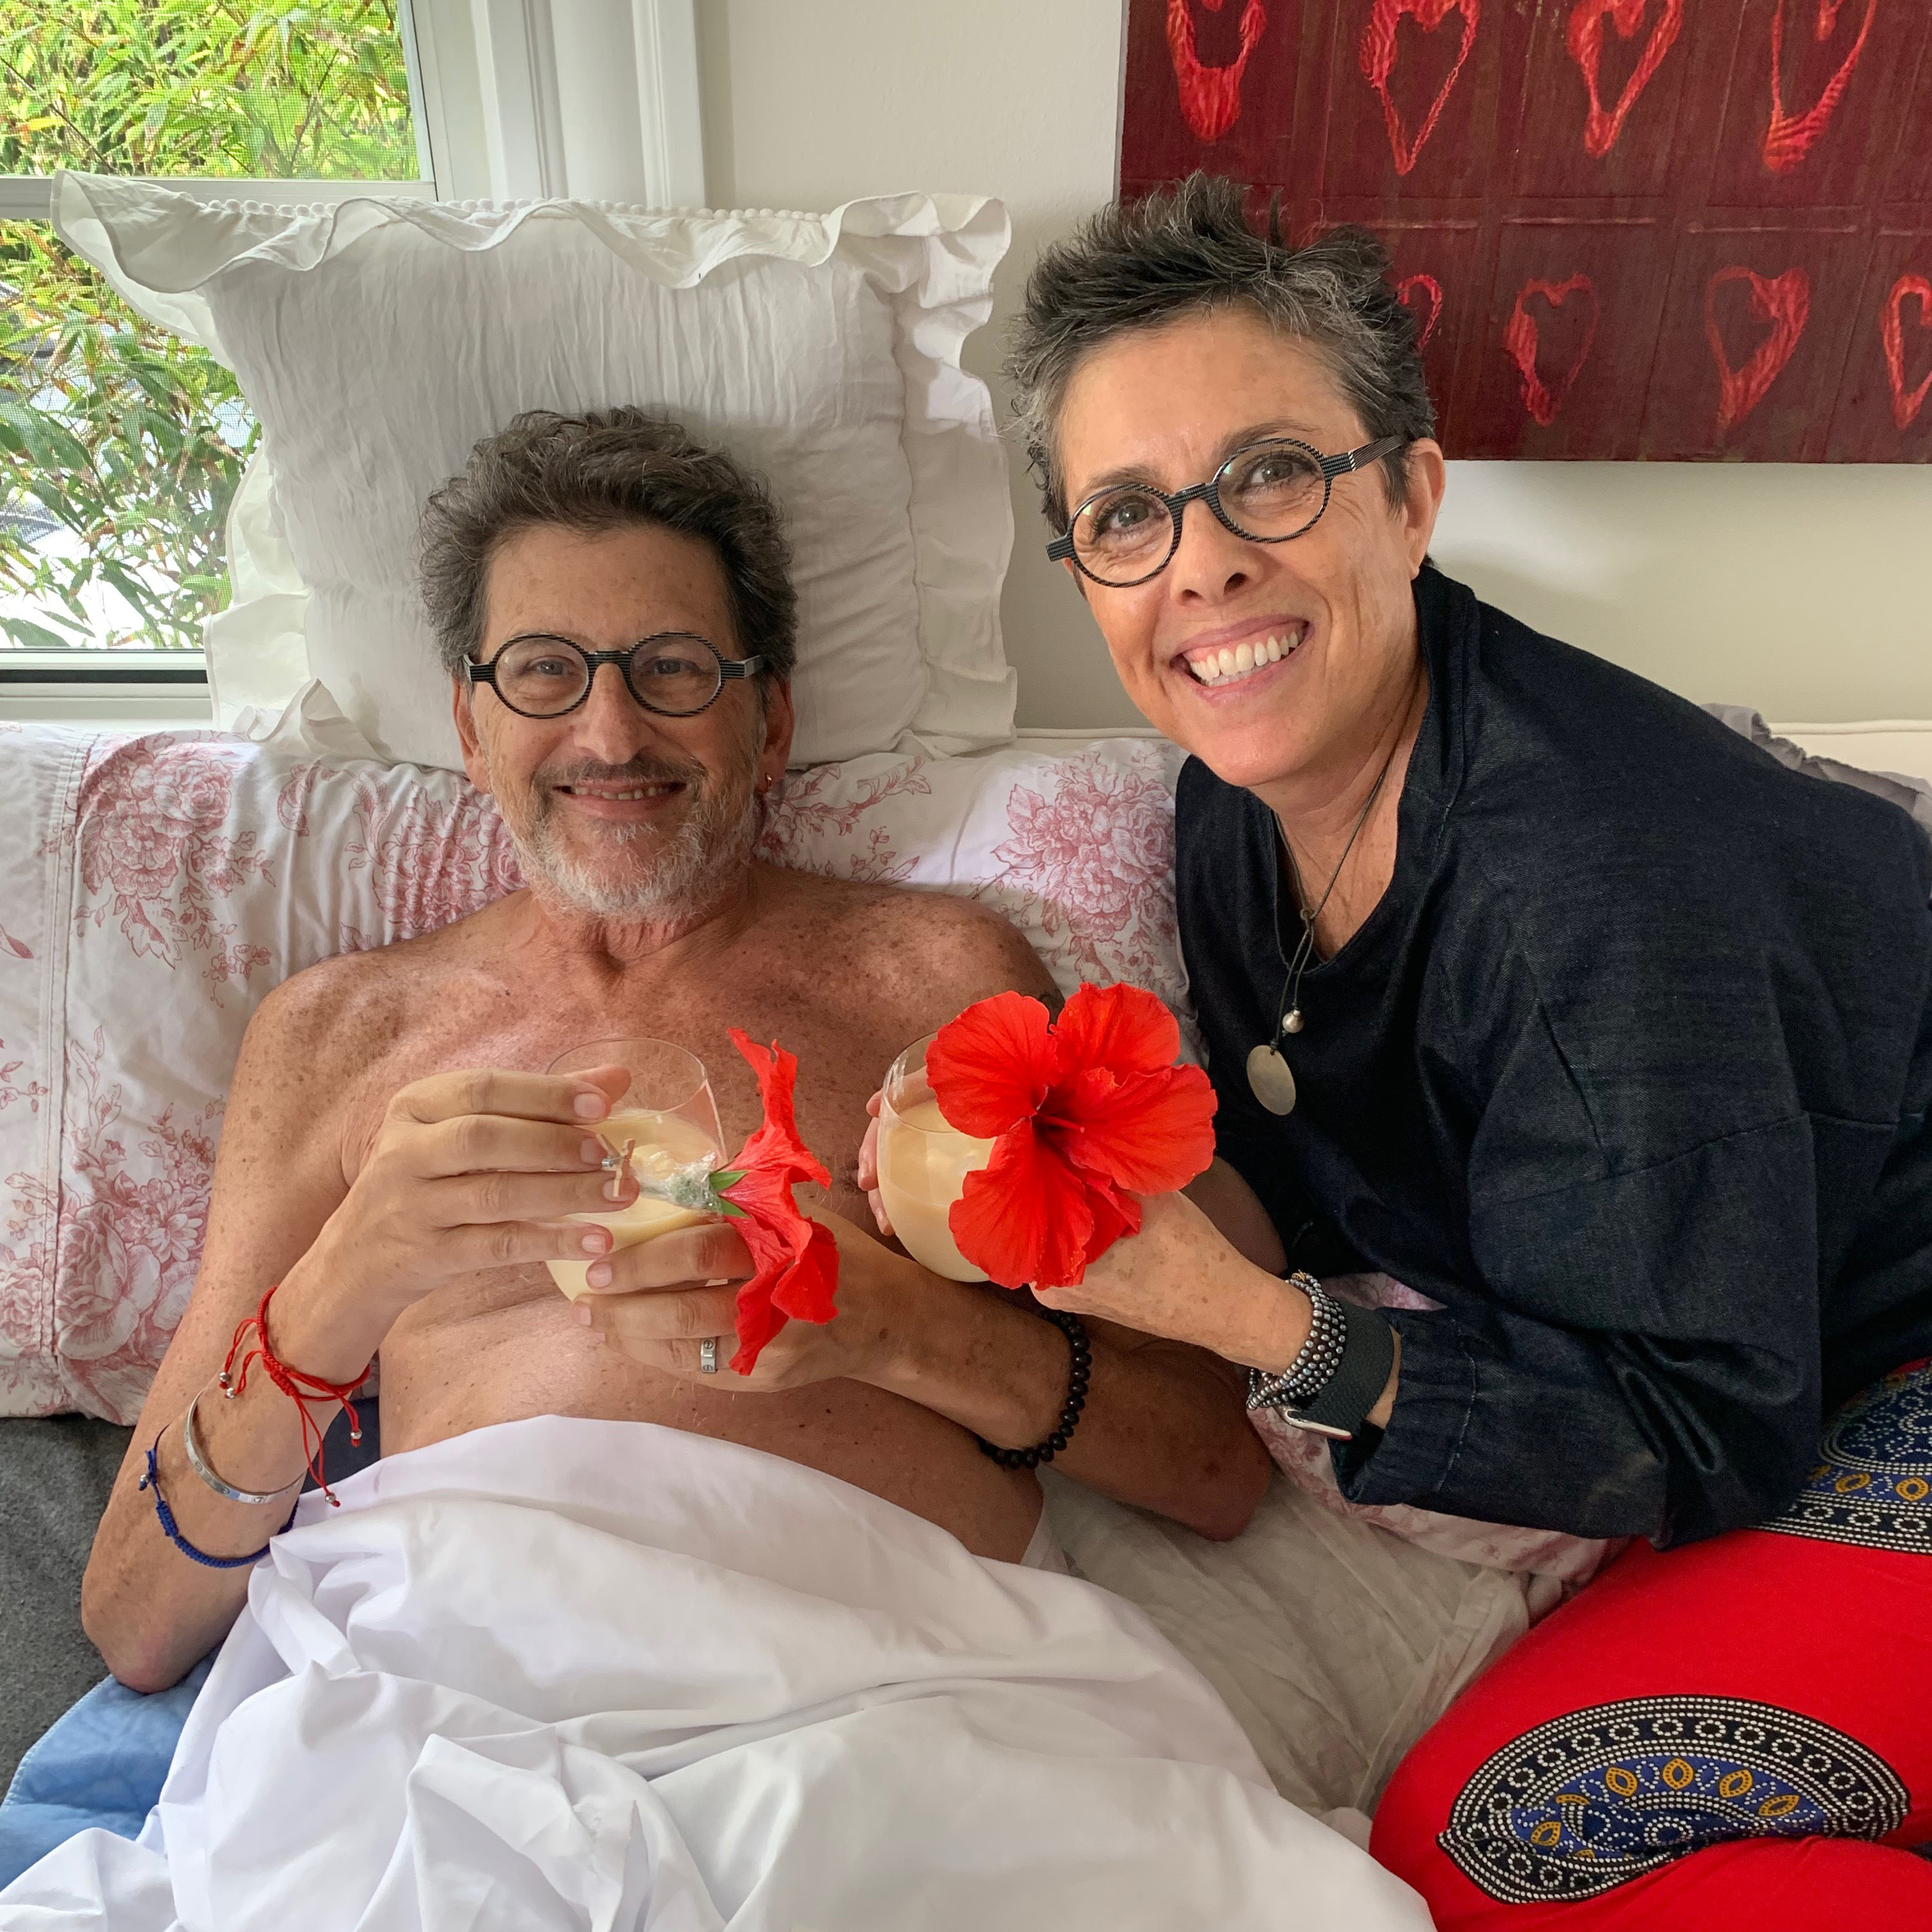 Alison Clay Duboff and her Husband Ken Duboff in a hospital bed with tropical drinks.